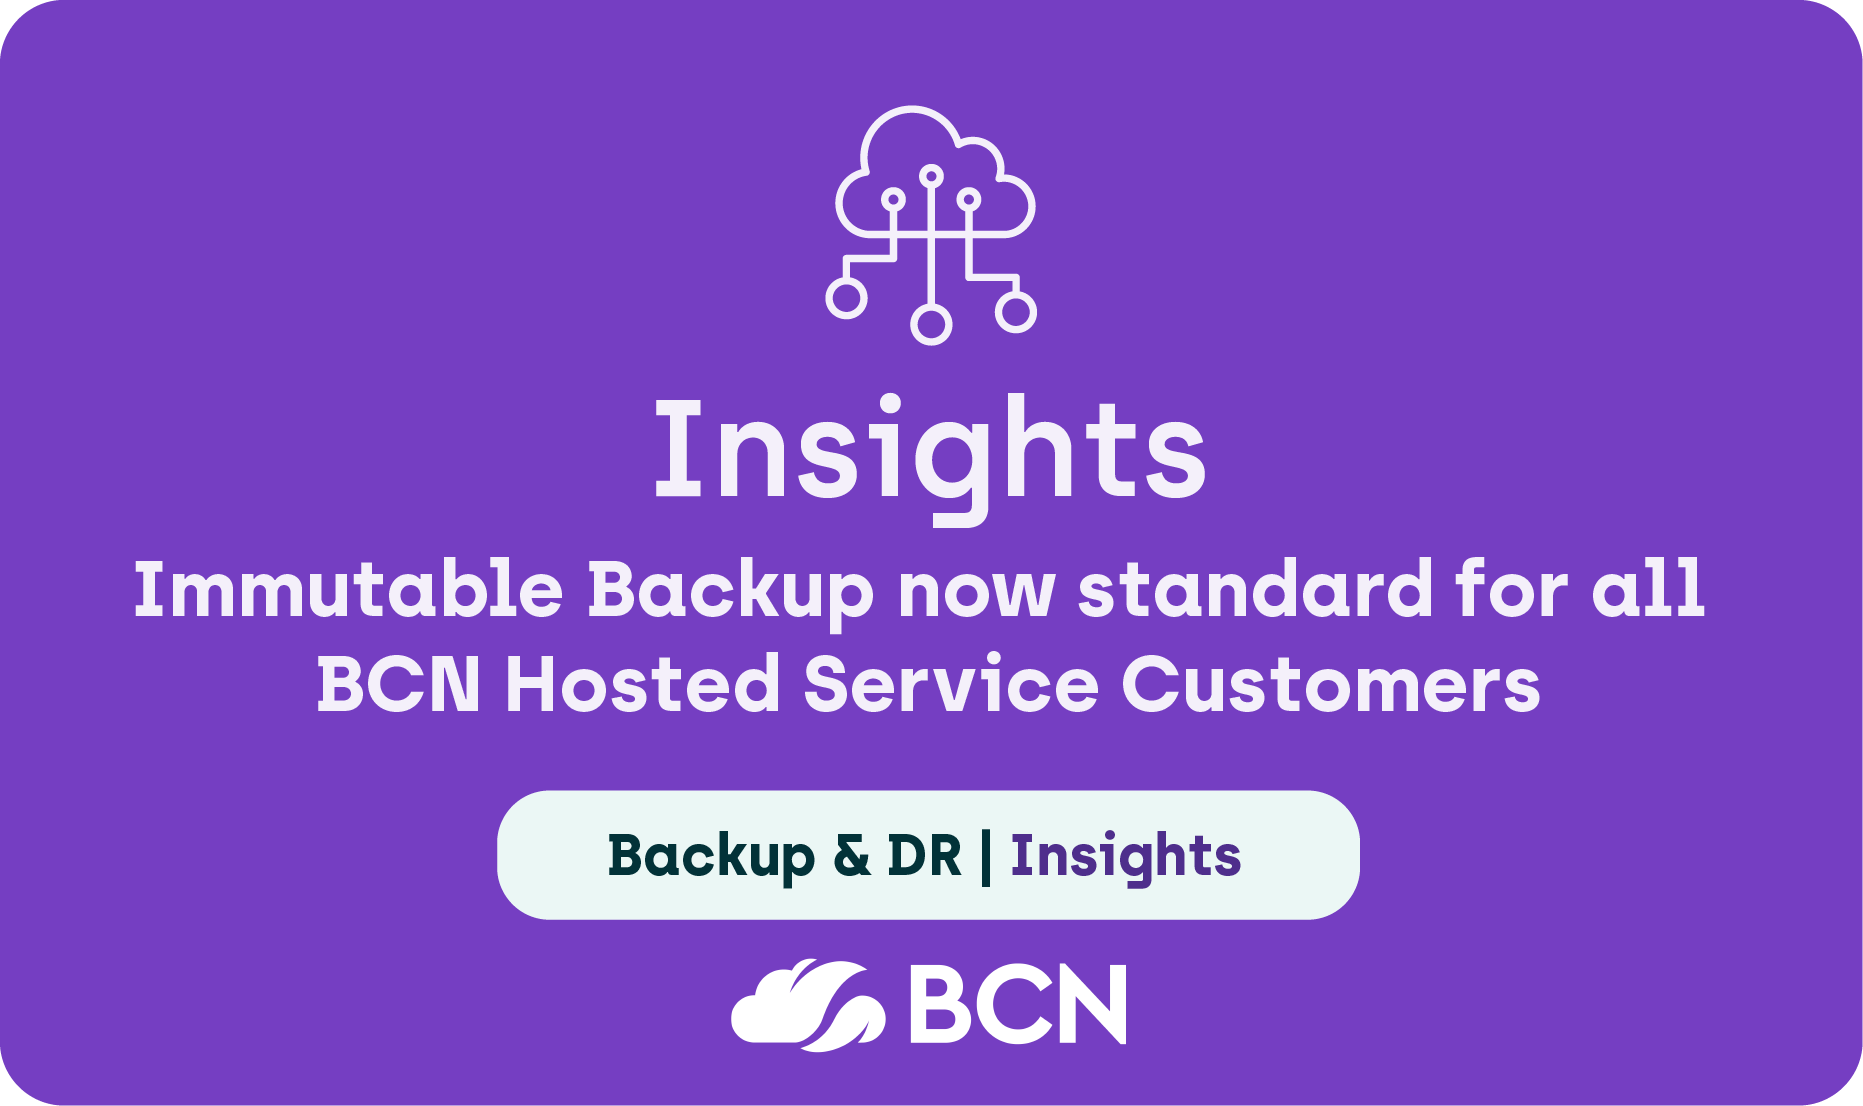 Immutable Backup now Standard for all BCN Hosted Services Customers